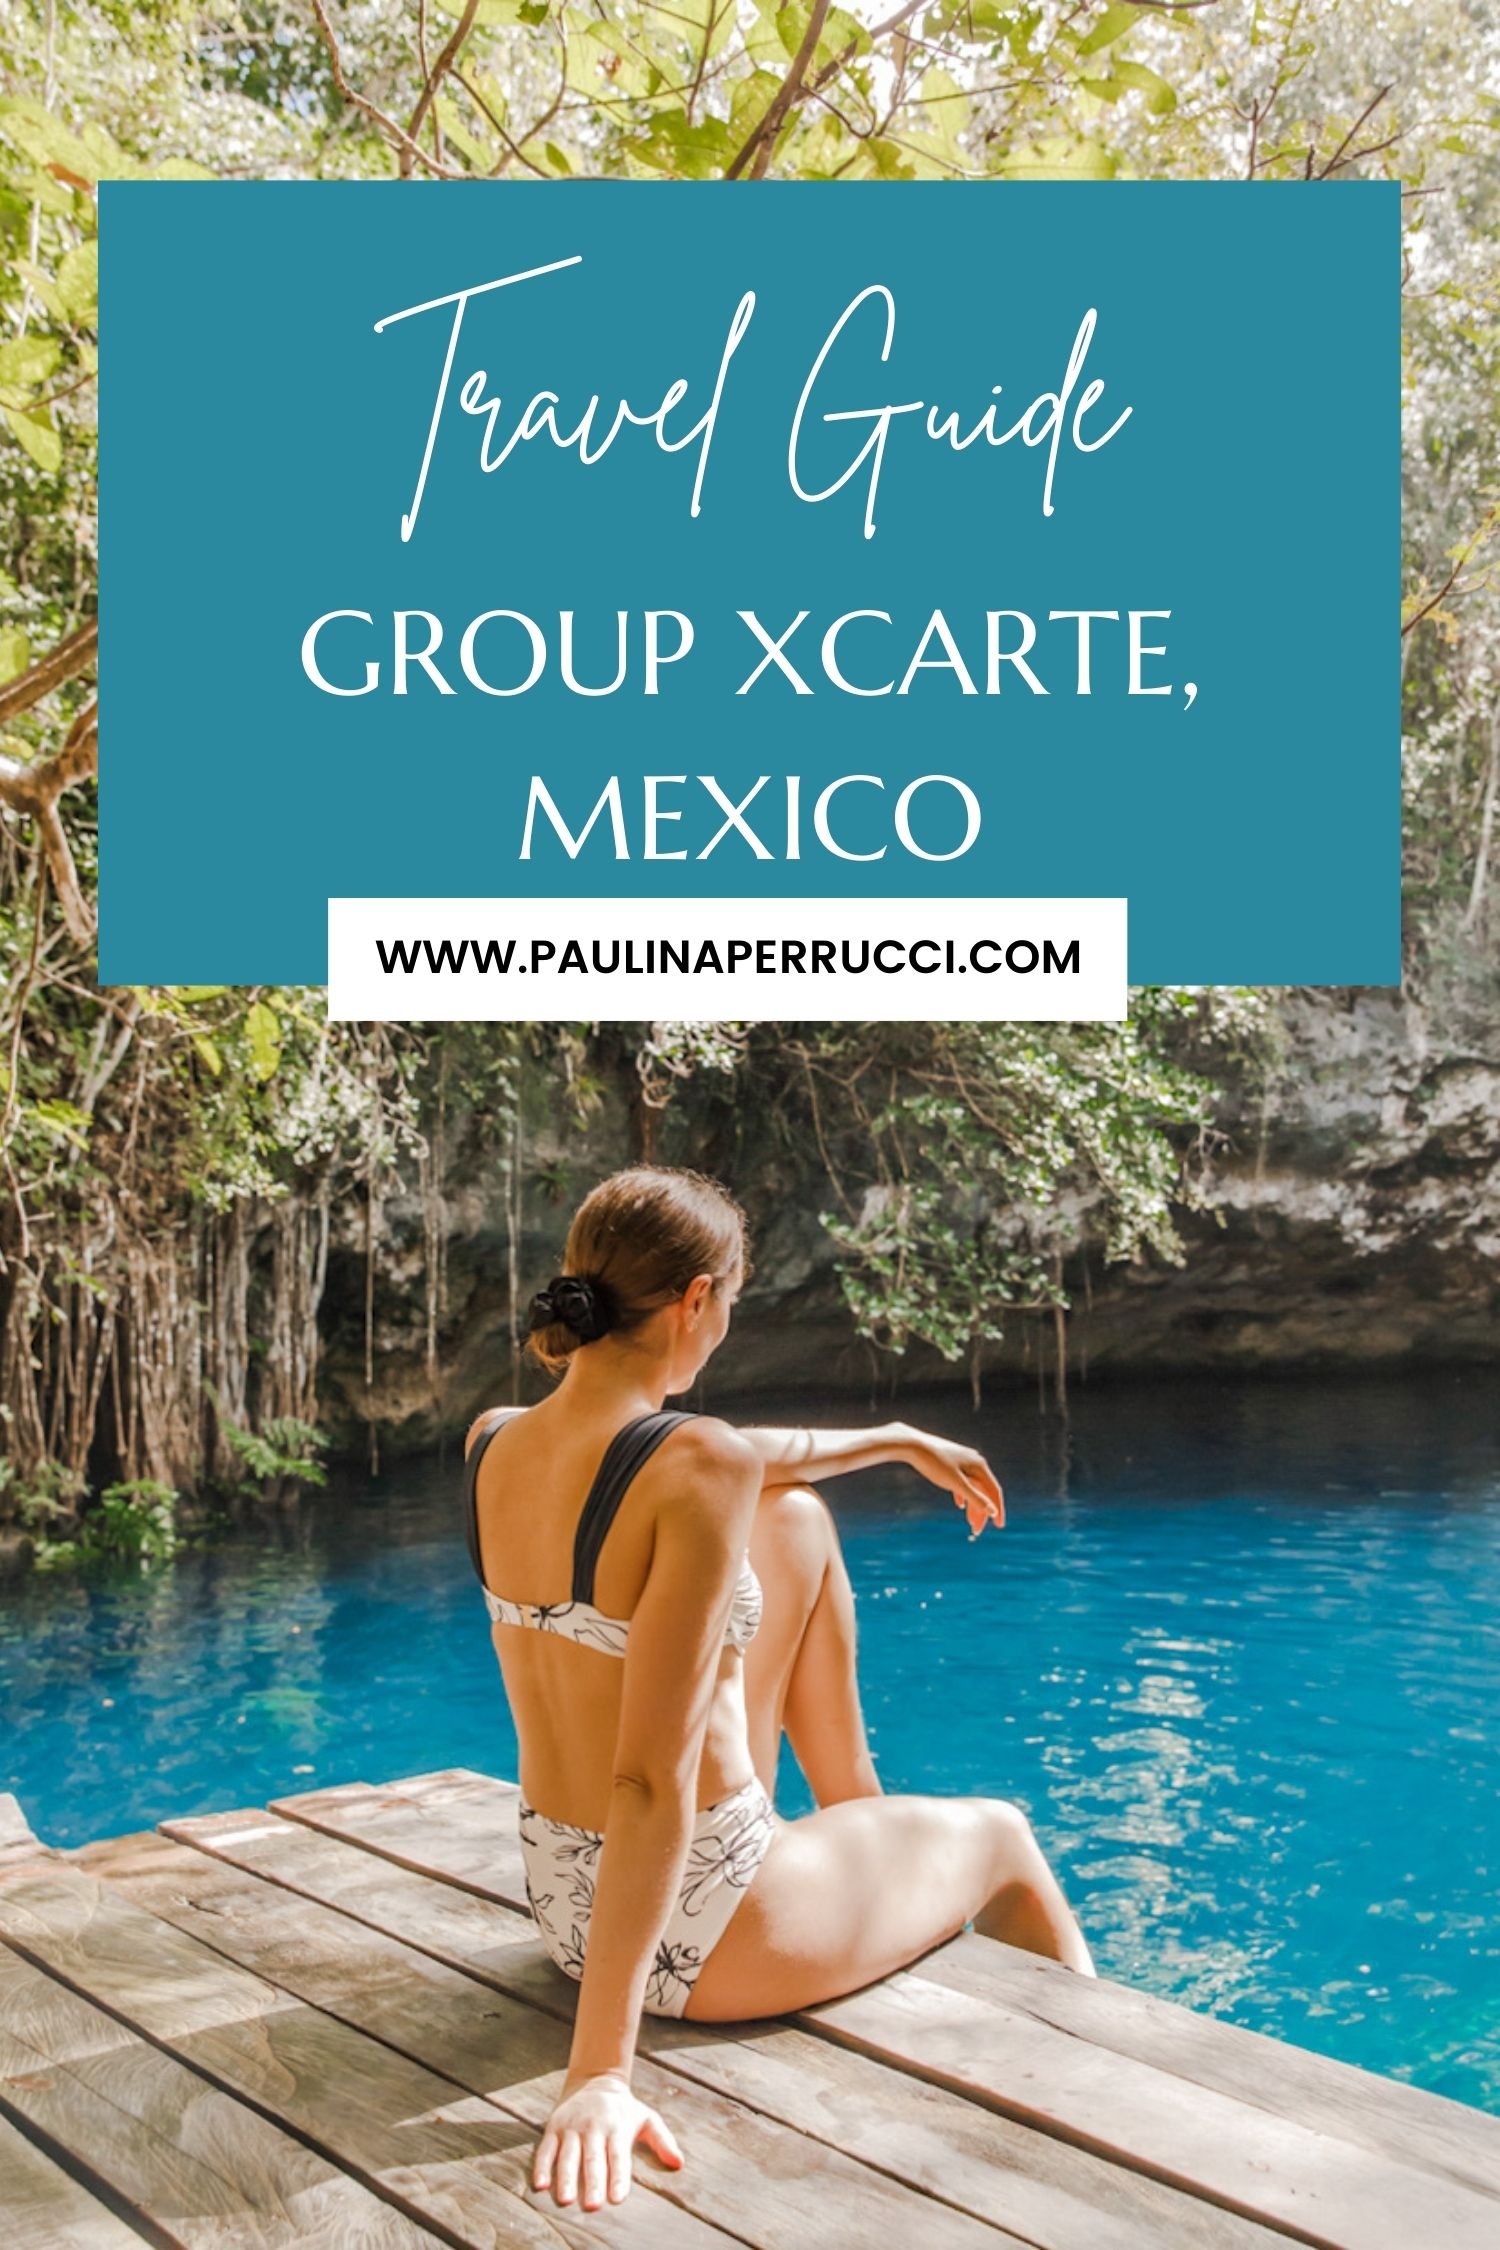 Best Water Park Adventures and Hotel Accommodations with Xcaret Group and Hotel XCARET ARTE, Mexico 